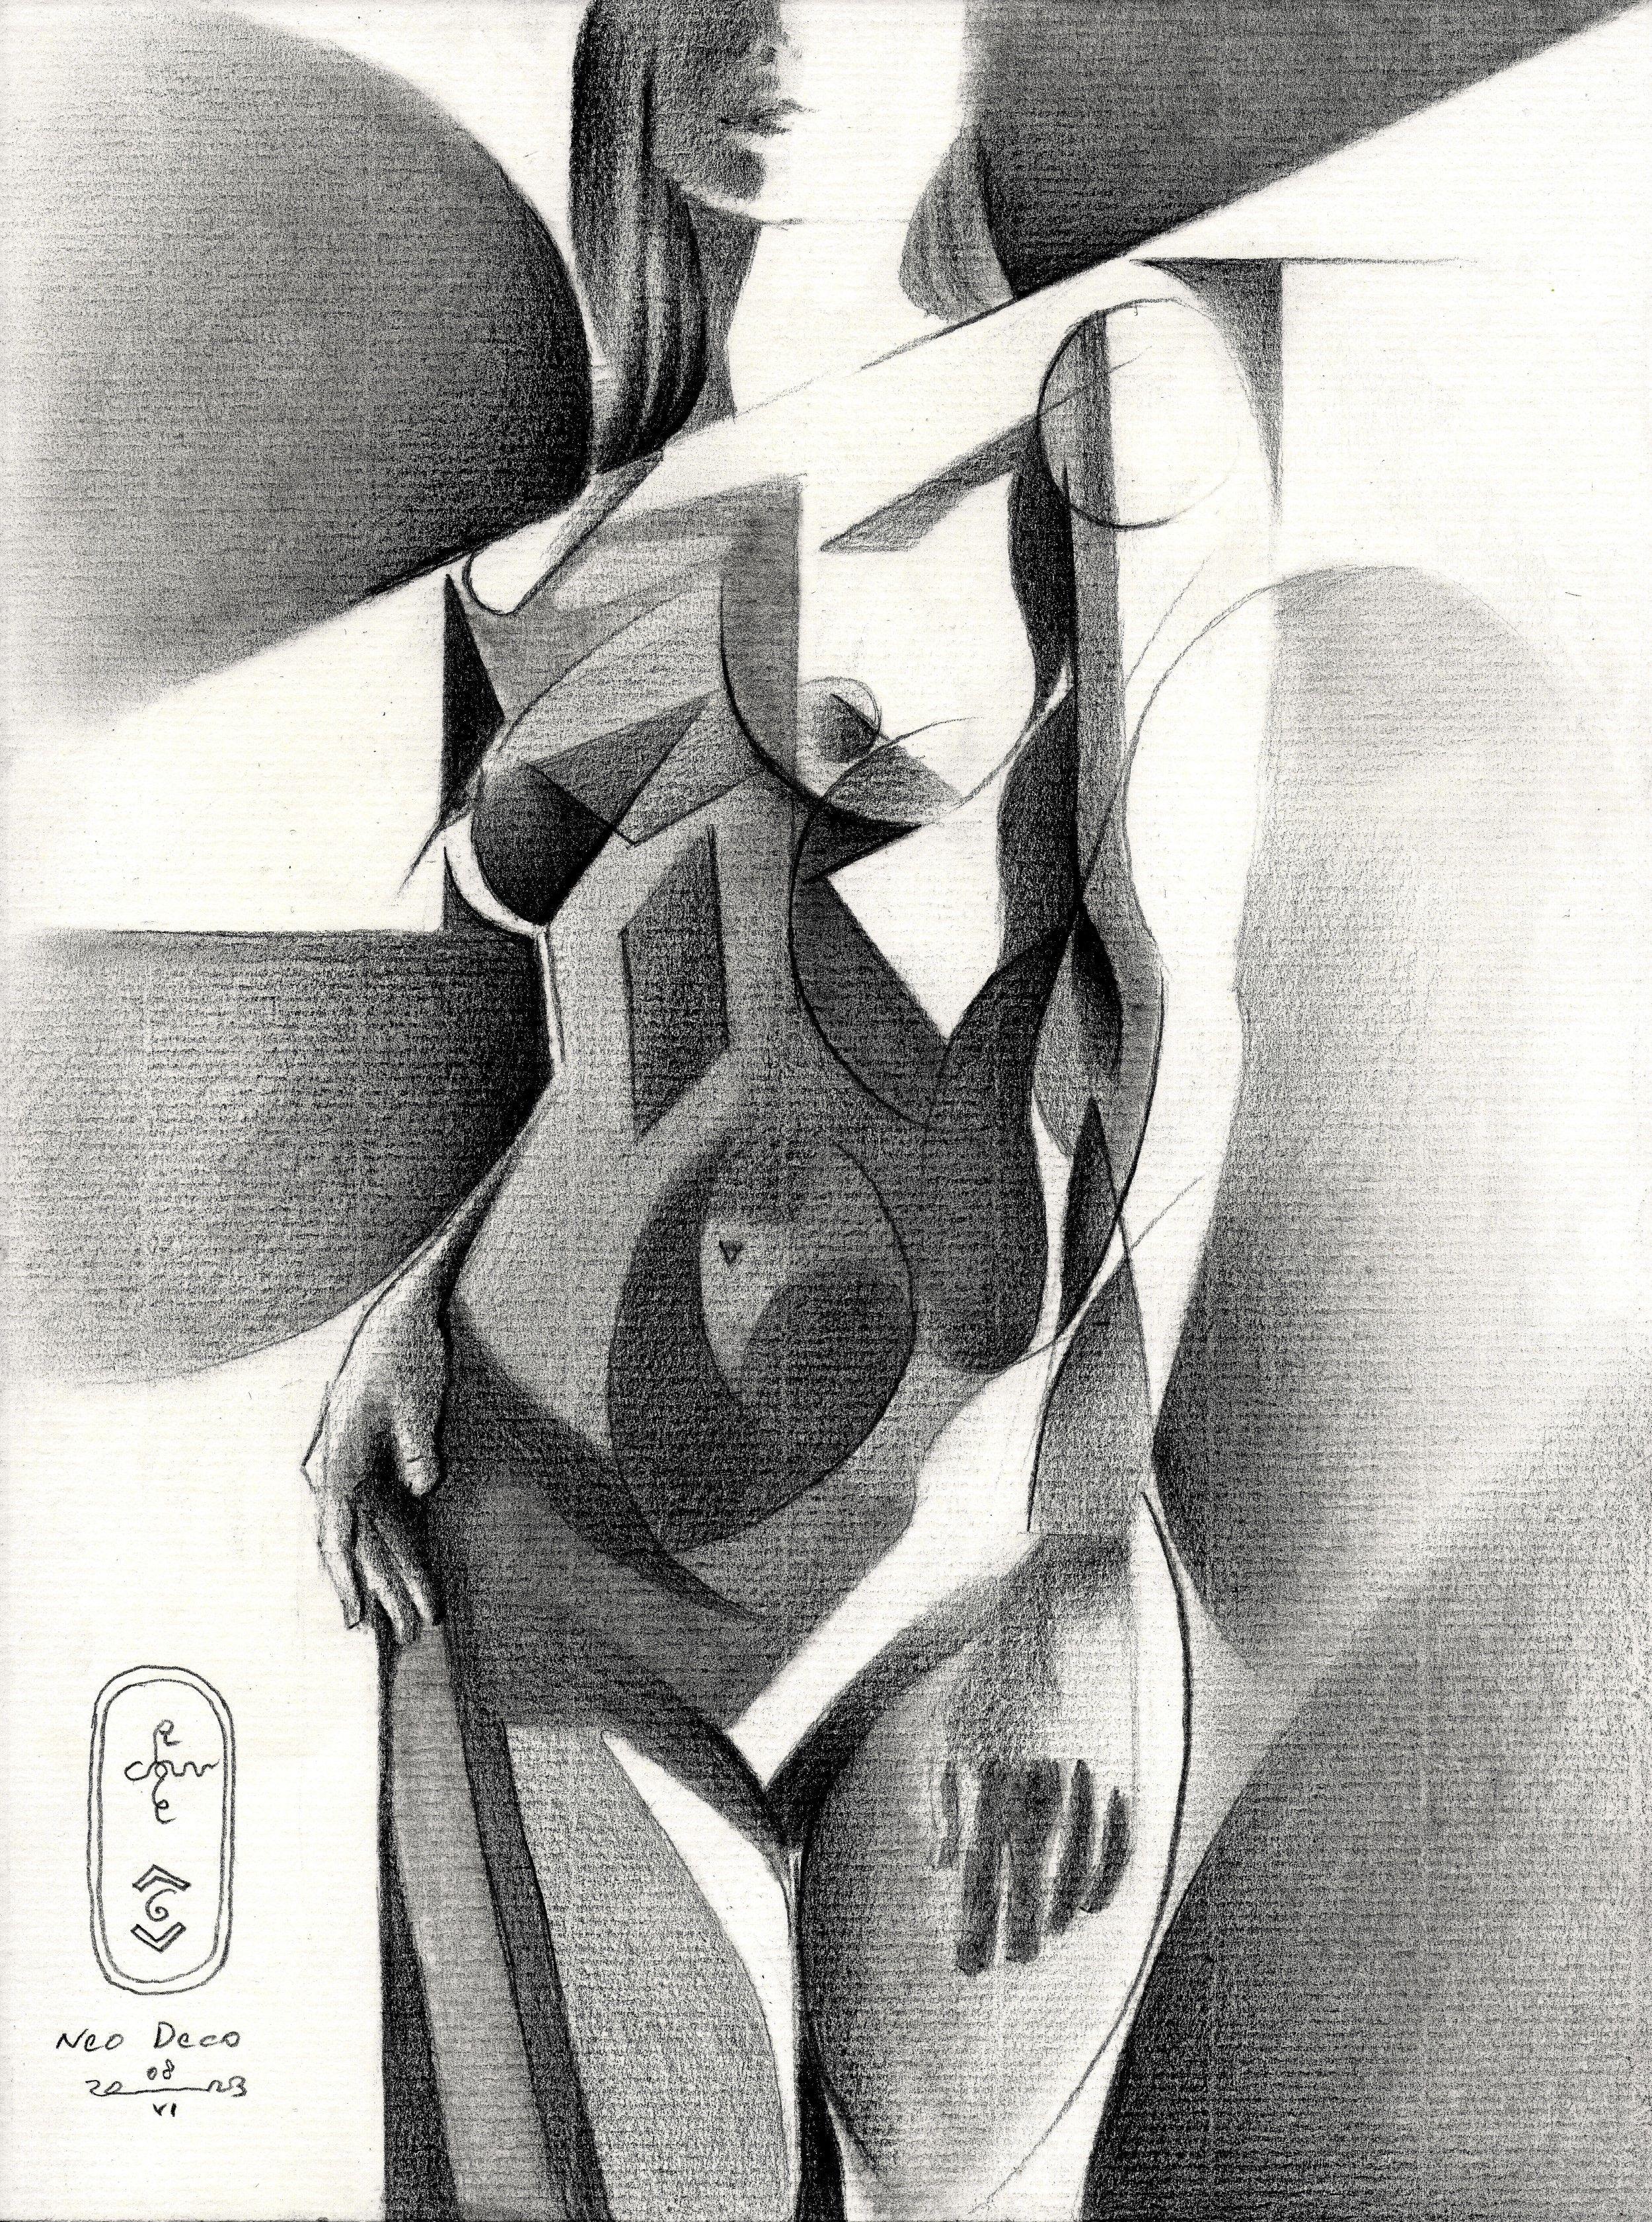 Neo Deco â€“ 08-06-23, Drawing, Pencil/Colored Pencil on Paper - Art by Corne Akkers